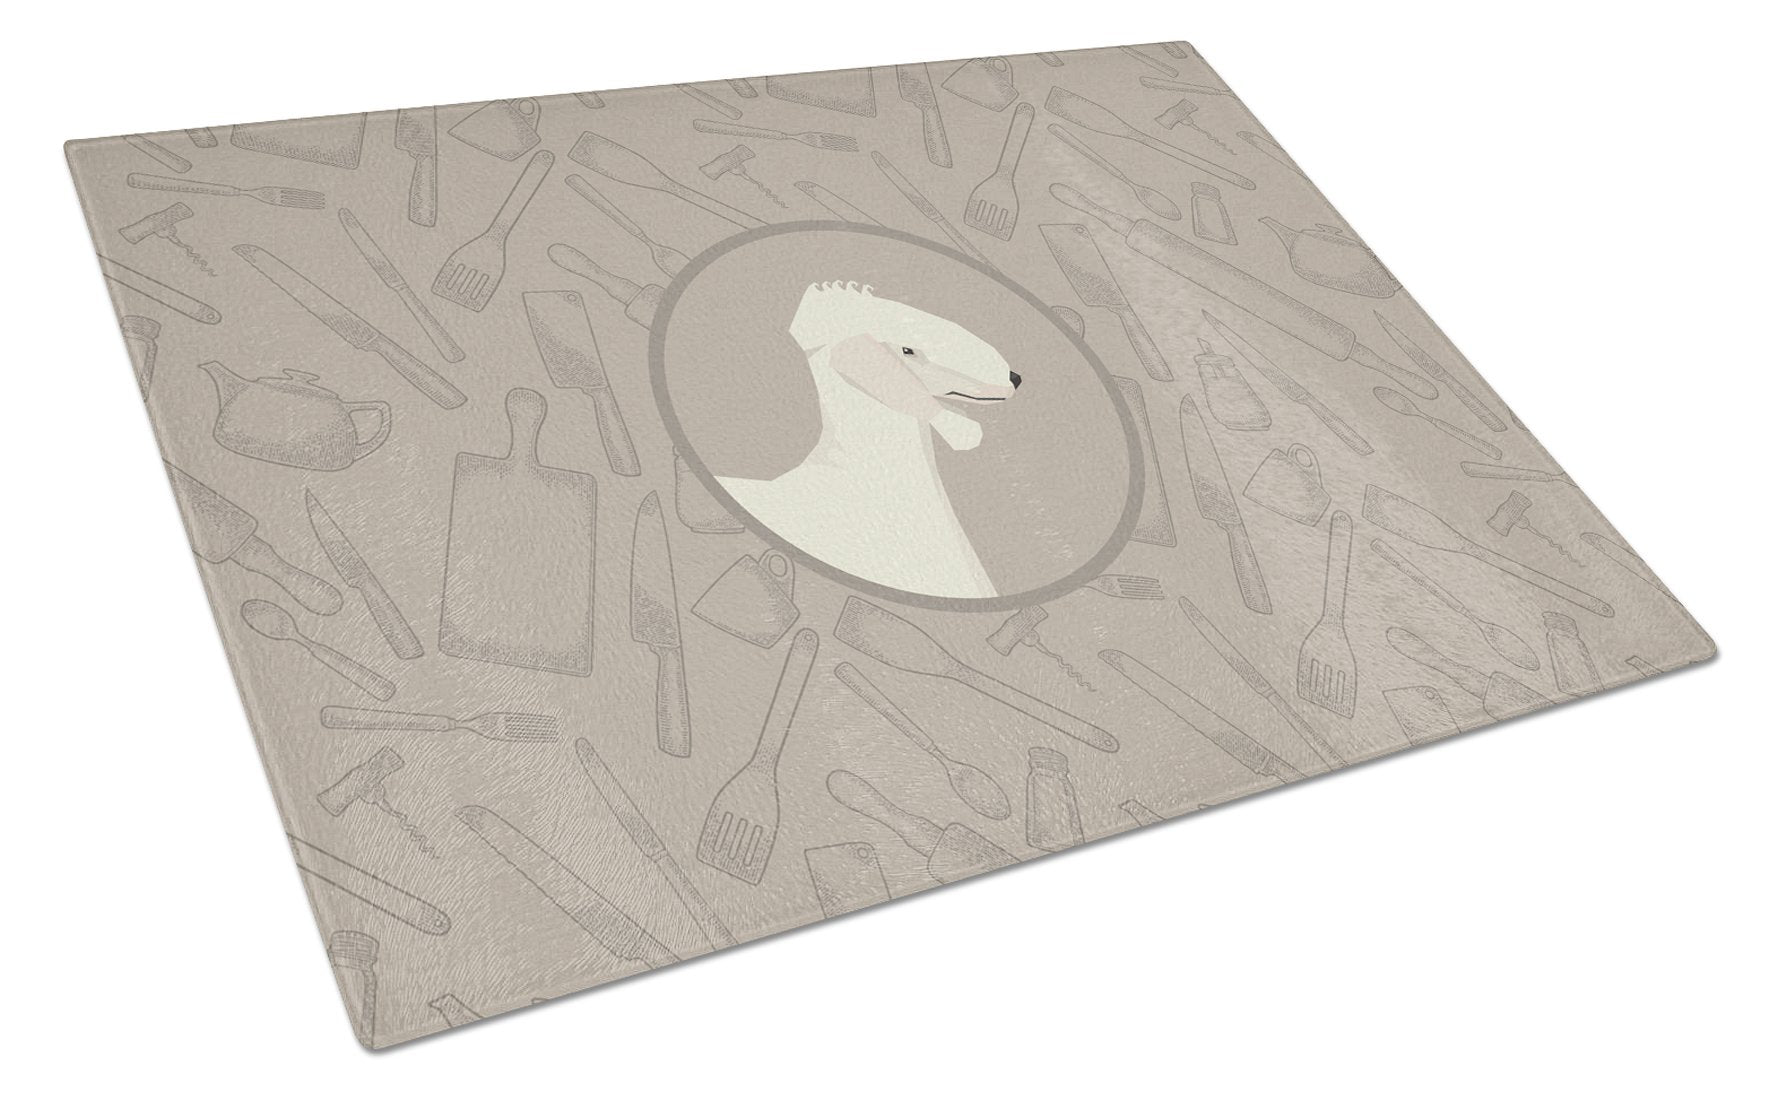 Bedlington Terrier In the Kitchen Glass Cutting Board Large CK2167LCB by Caroline's Treasures